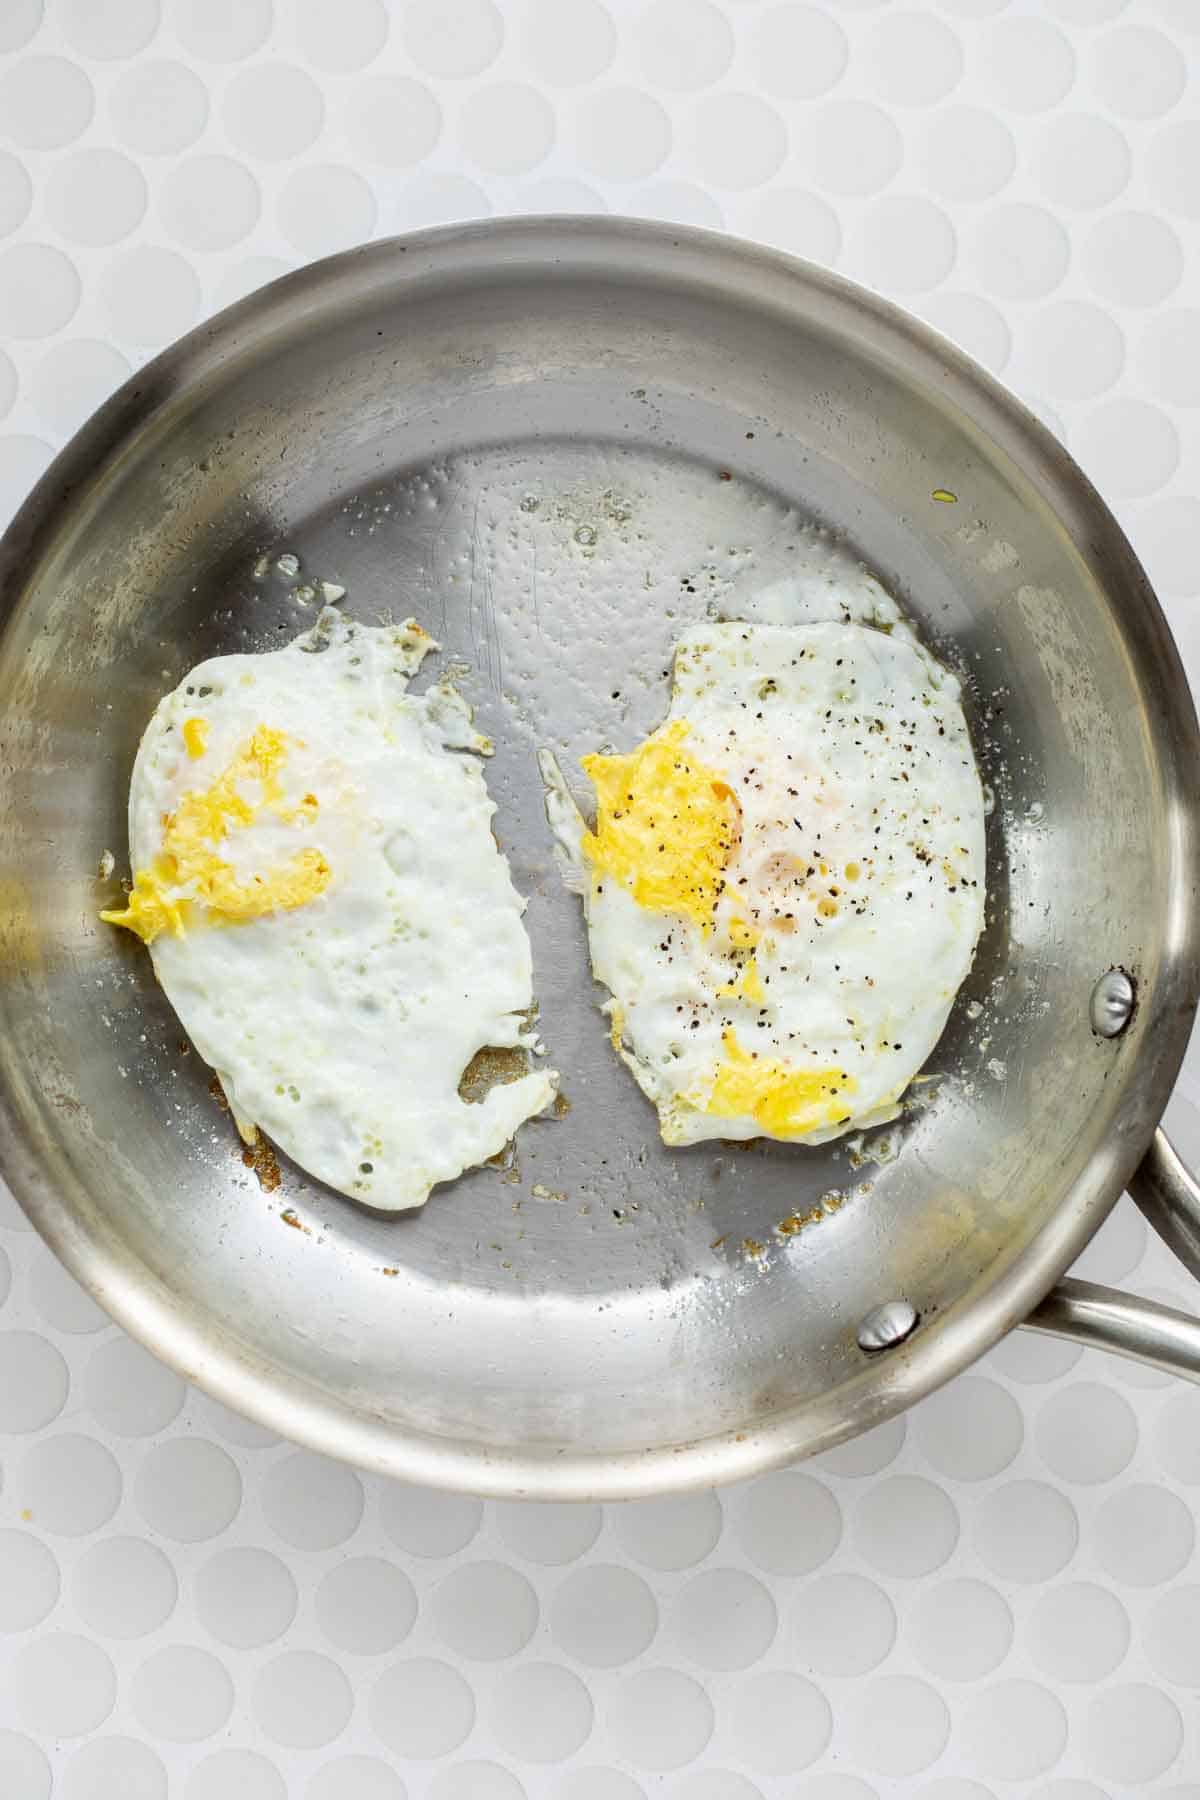 2 eggs cooked over hard in a stainless steel pan.